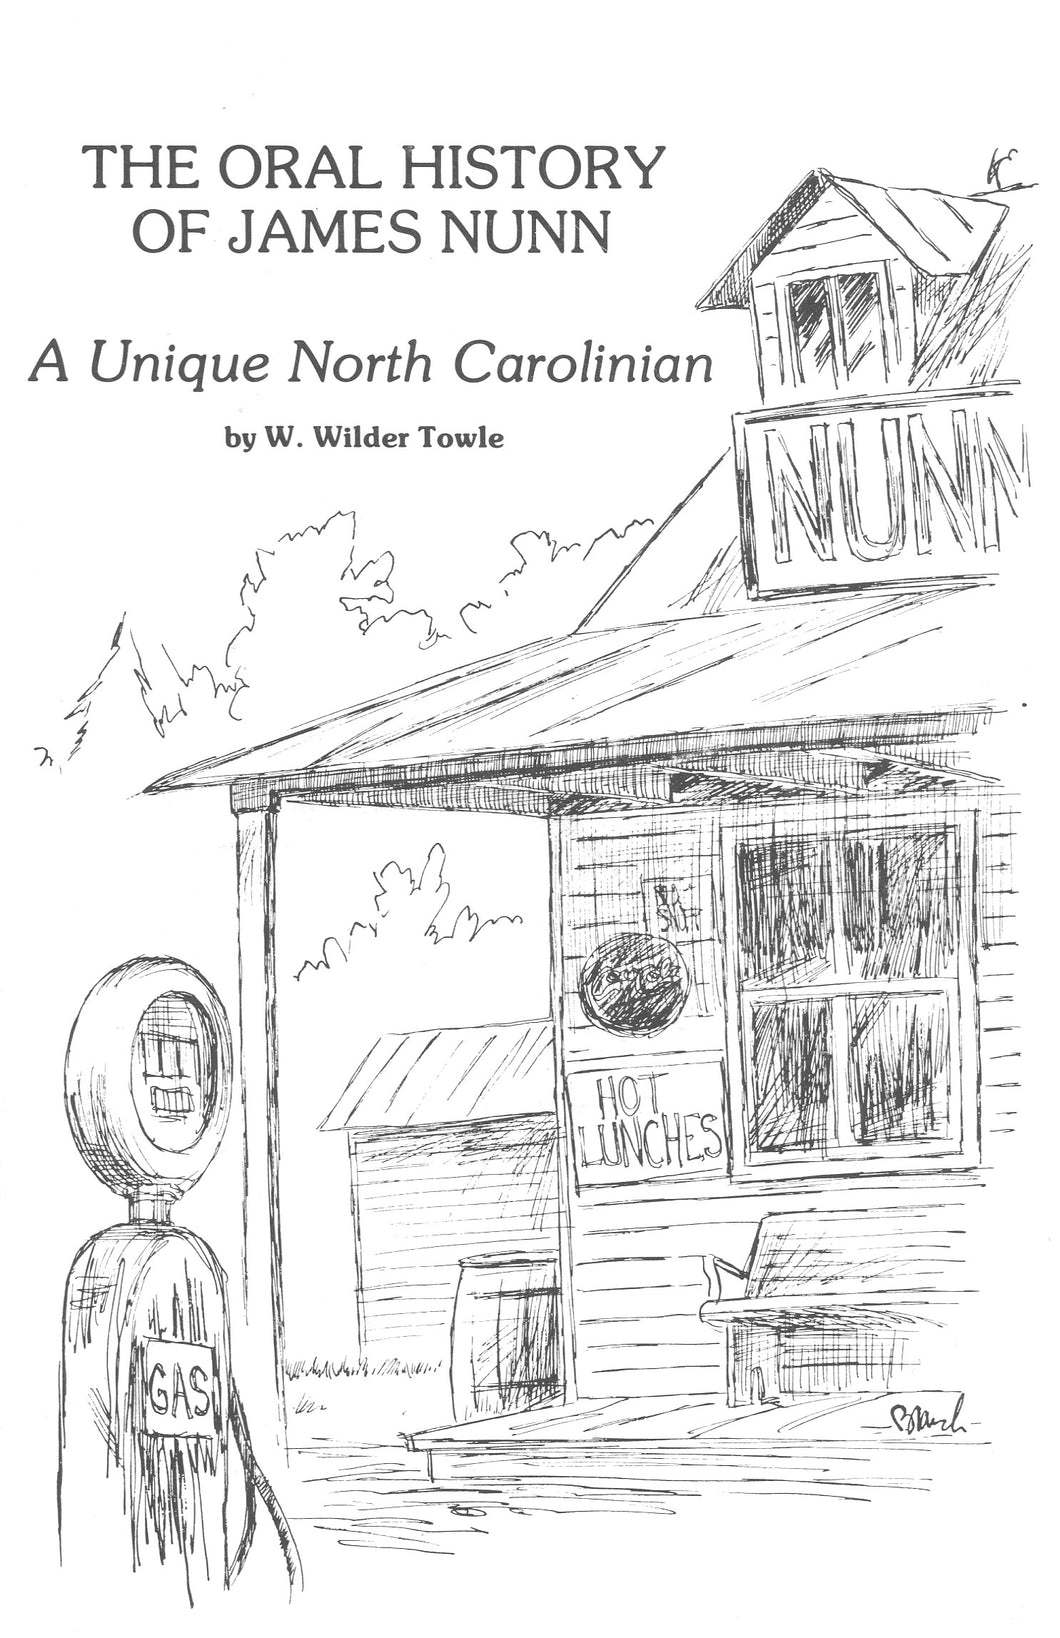 The Oral History of James Nunn: A Unique North Carolinian, by W. Wilder Towle